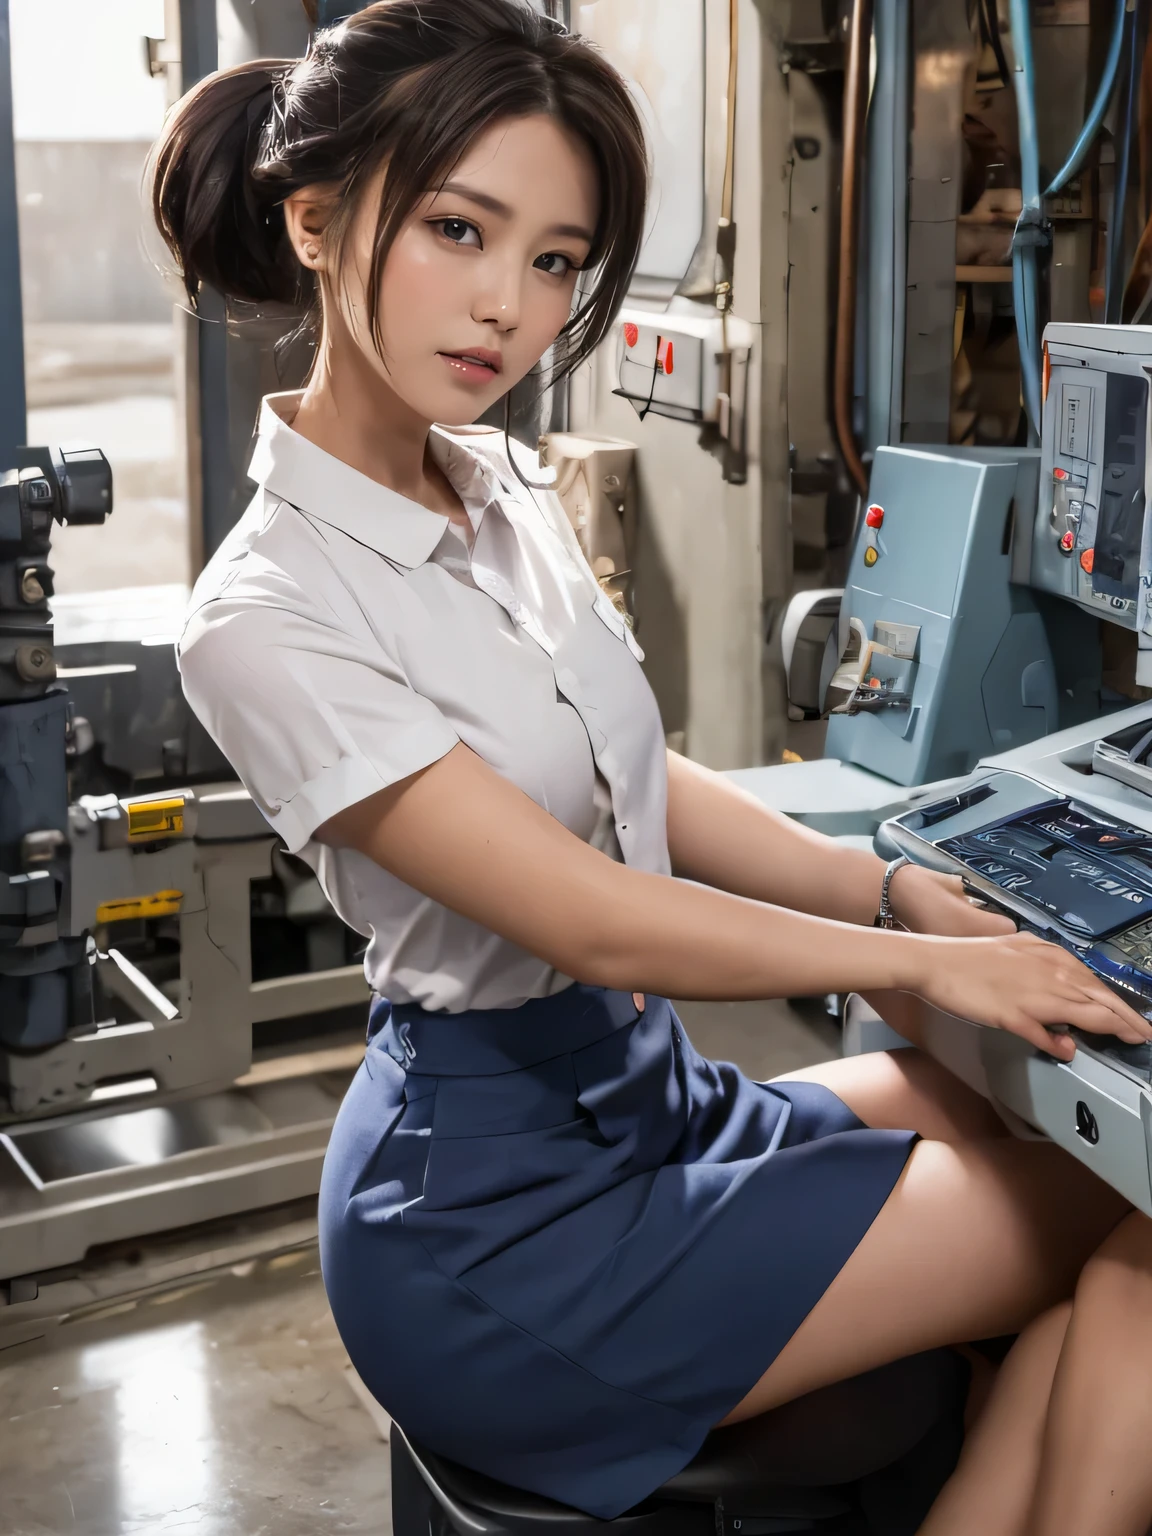 a women, (((round face, hair up))), factory clerk, wearing work clothes, long skirt, straddling to hit her crotch on a machine corner for masturbation, open legs, raise leg, ecstasy face, in the factory, machines, ceiling, nameplate, id card